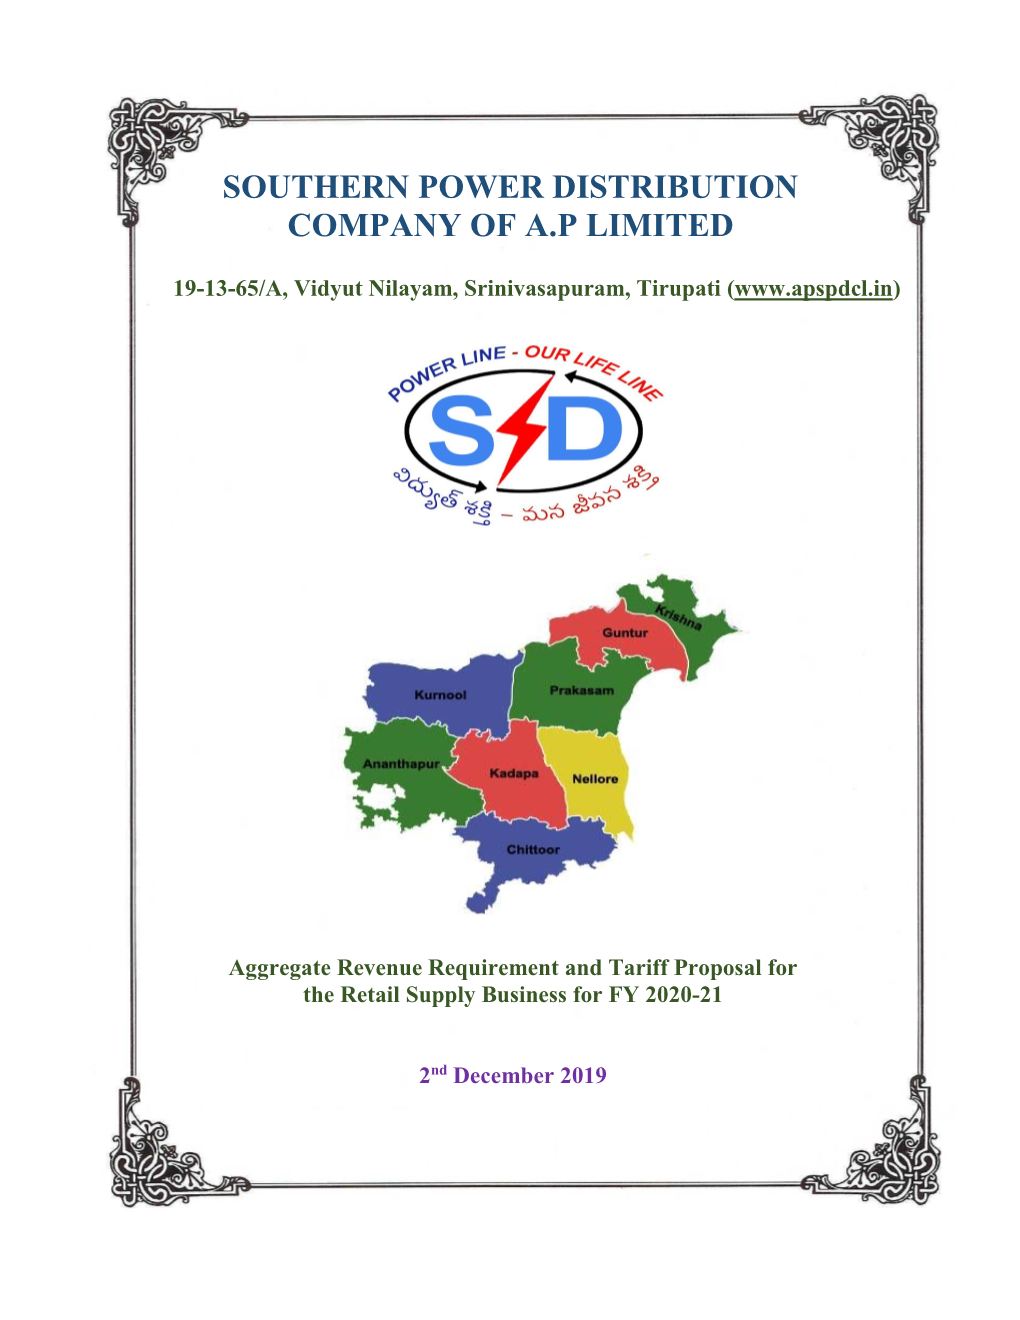 Southern Power Distribution Company of A.P Limited